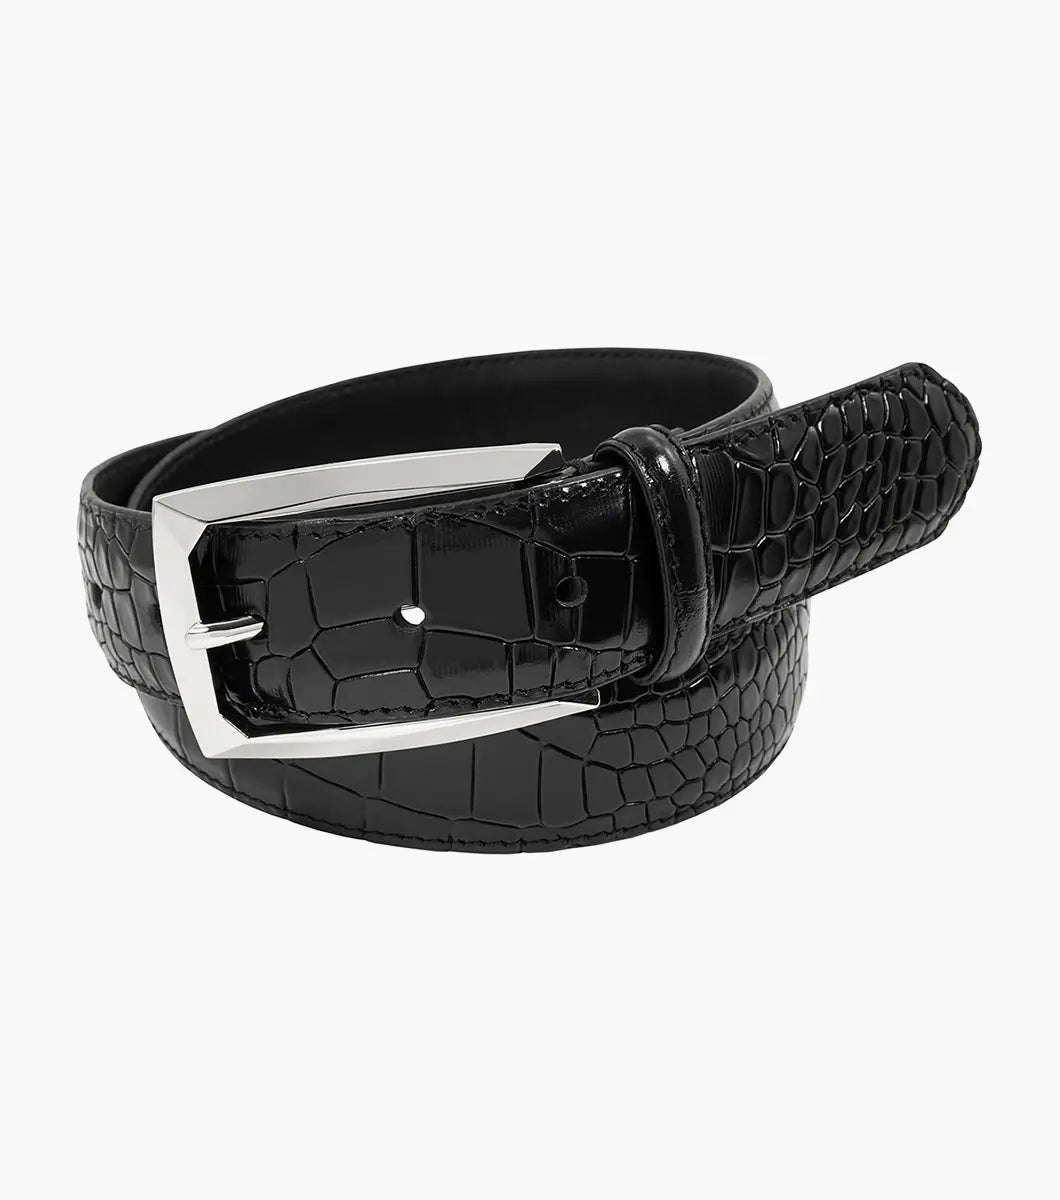 (Brand) Stacy Adams Black OZZIE Genuine Leather Croc Emboss Belt Available Sizes 40-42